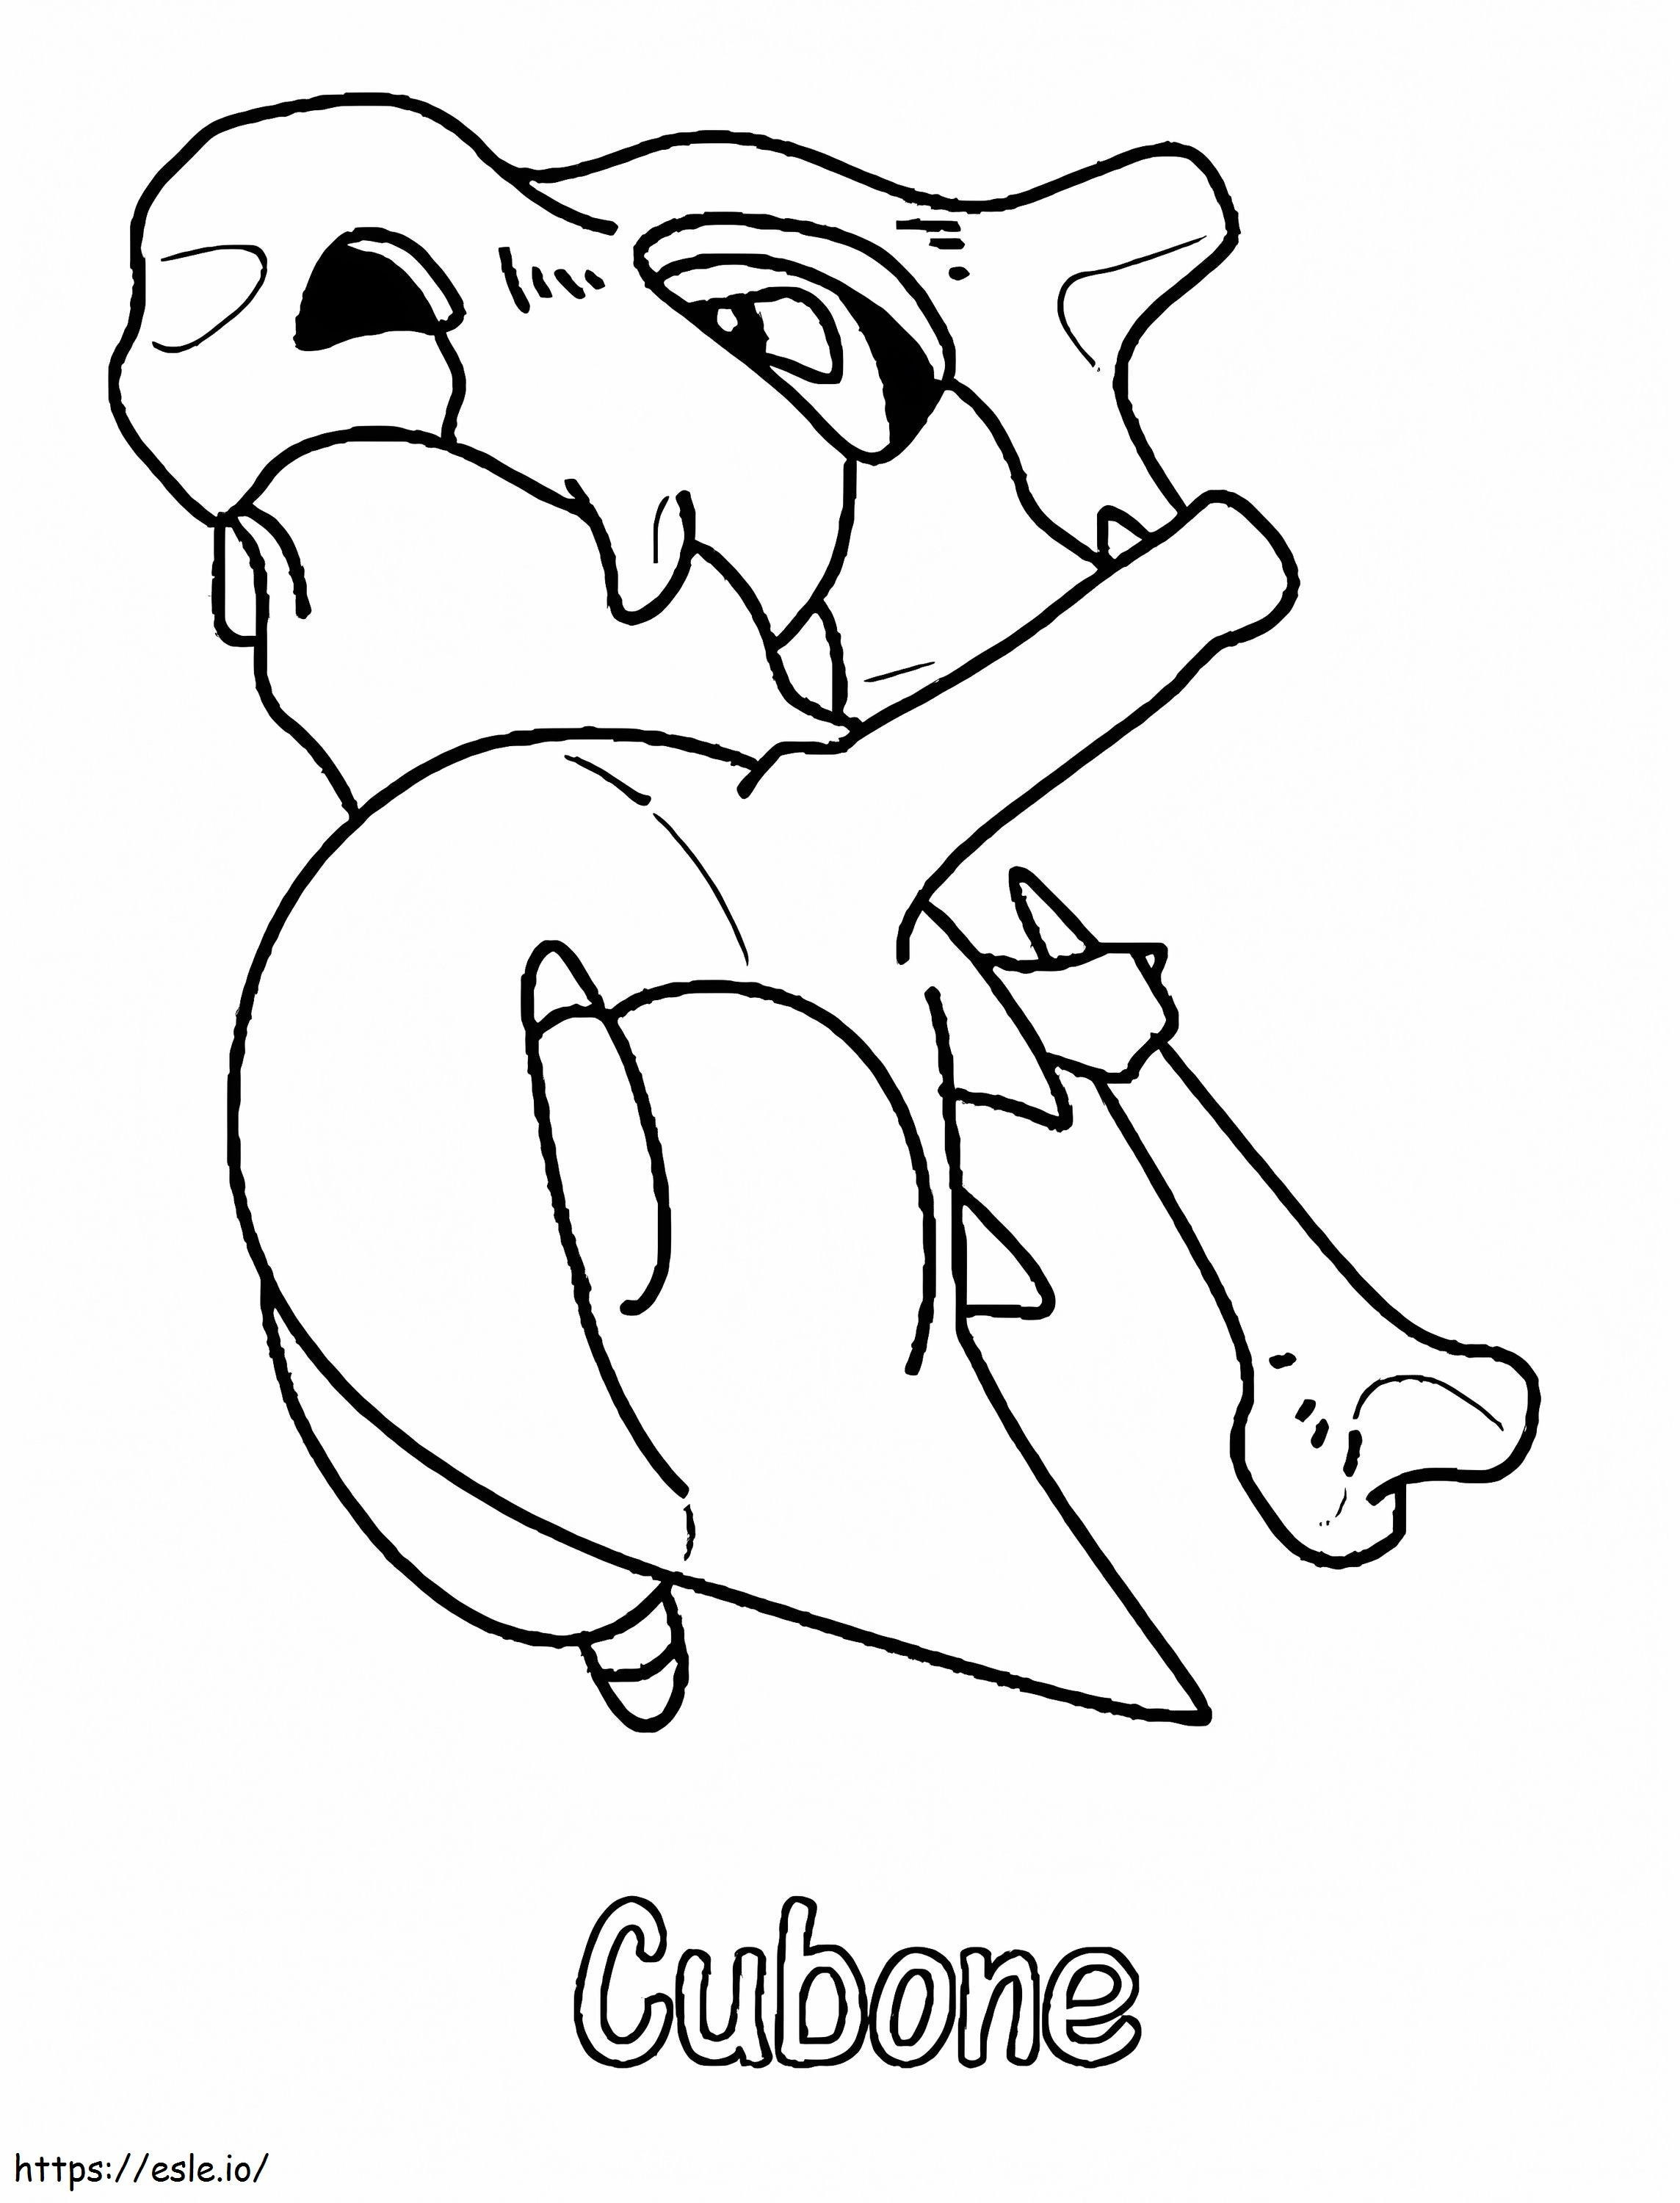 Cubone 4 Coloring Game coloring page